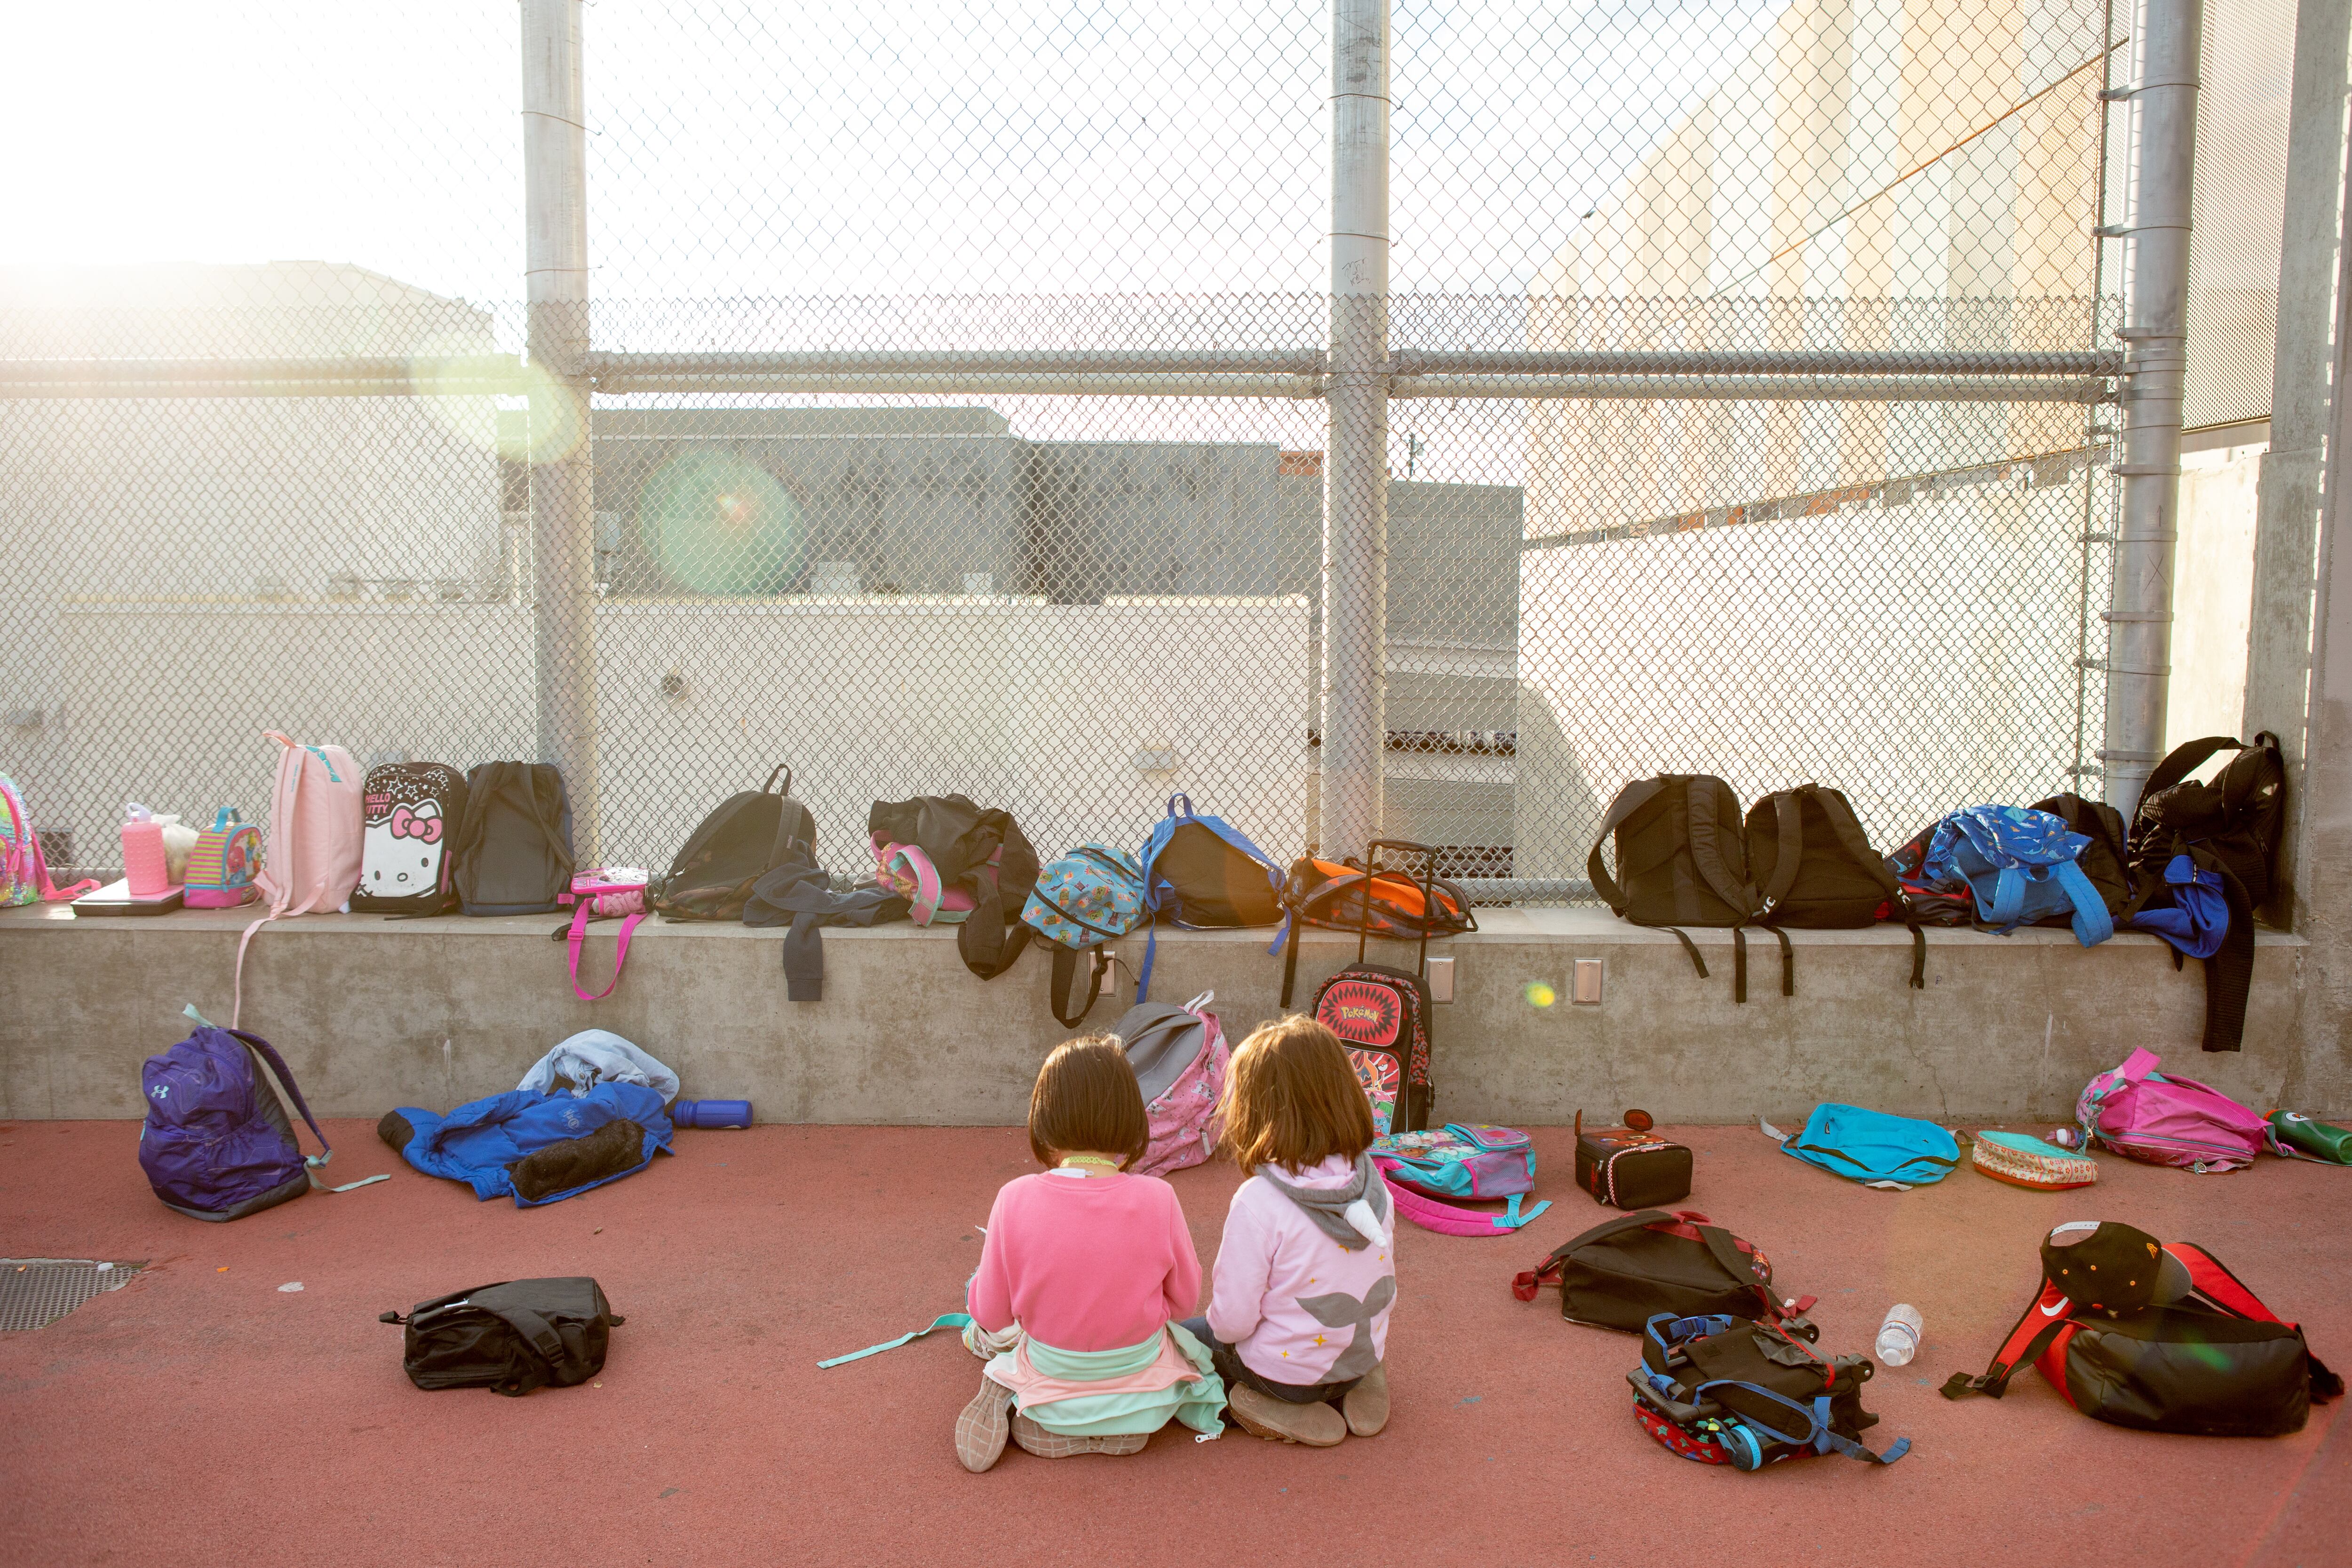 Two young students sit outside next to more than a dozen backpacks.